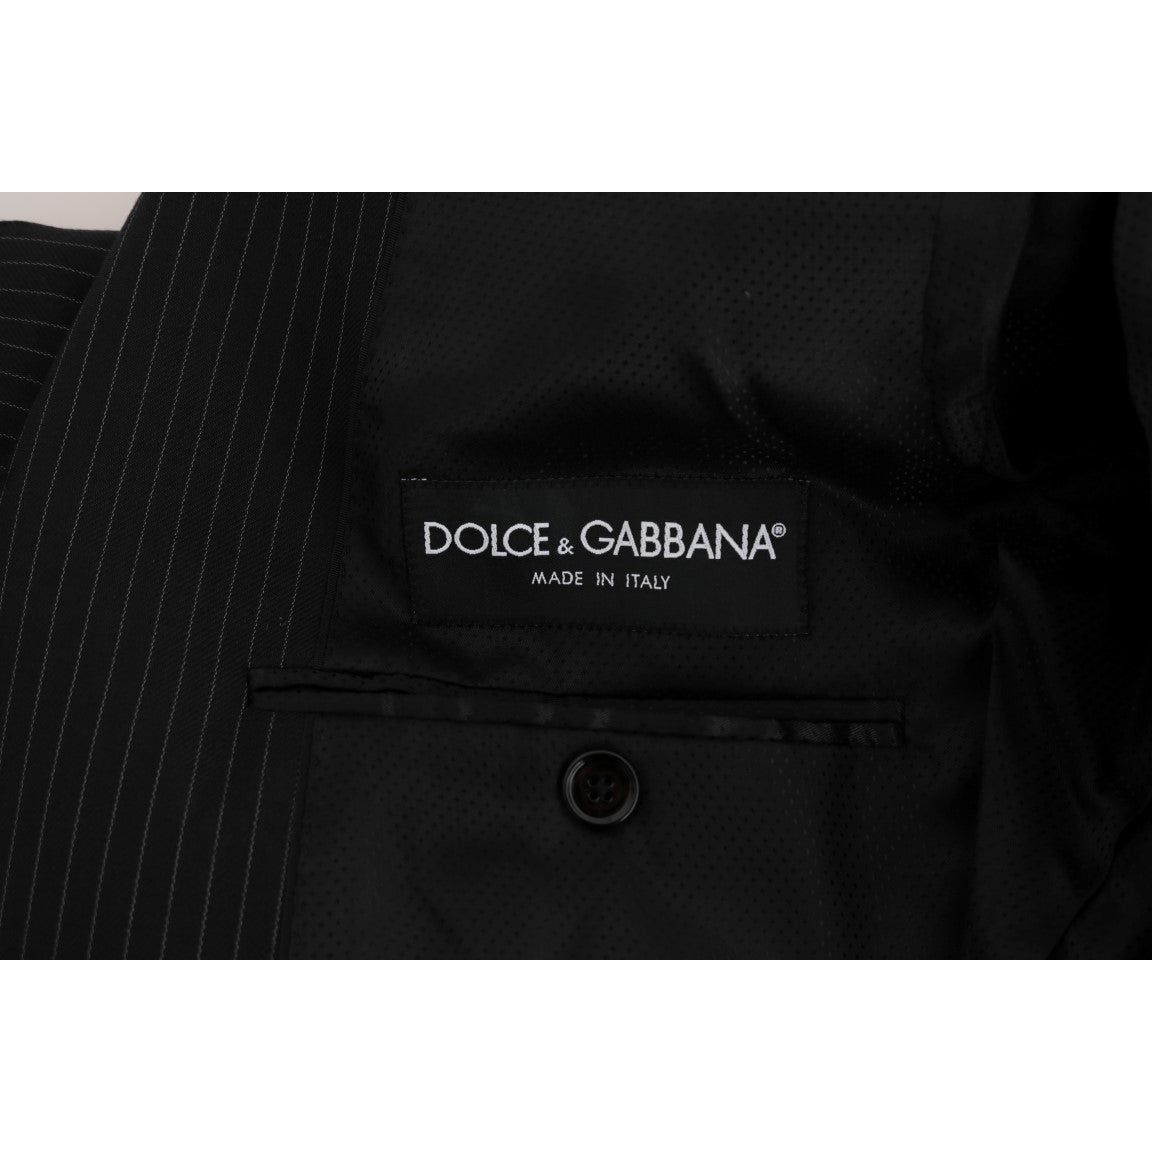 Dolce & Gabbana Elegant Gray Striped Wool Silk Men's 3-Piece Suit Suit gray-double-breasted-3-piece-suit 460447-gray-double-breasted-3-piece-suit-9.jpg